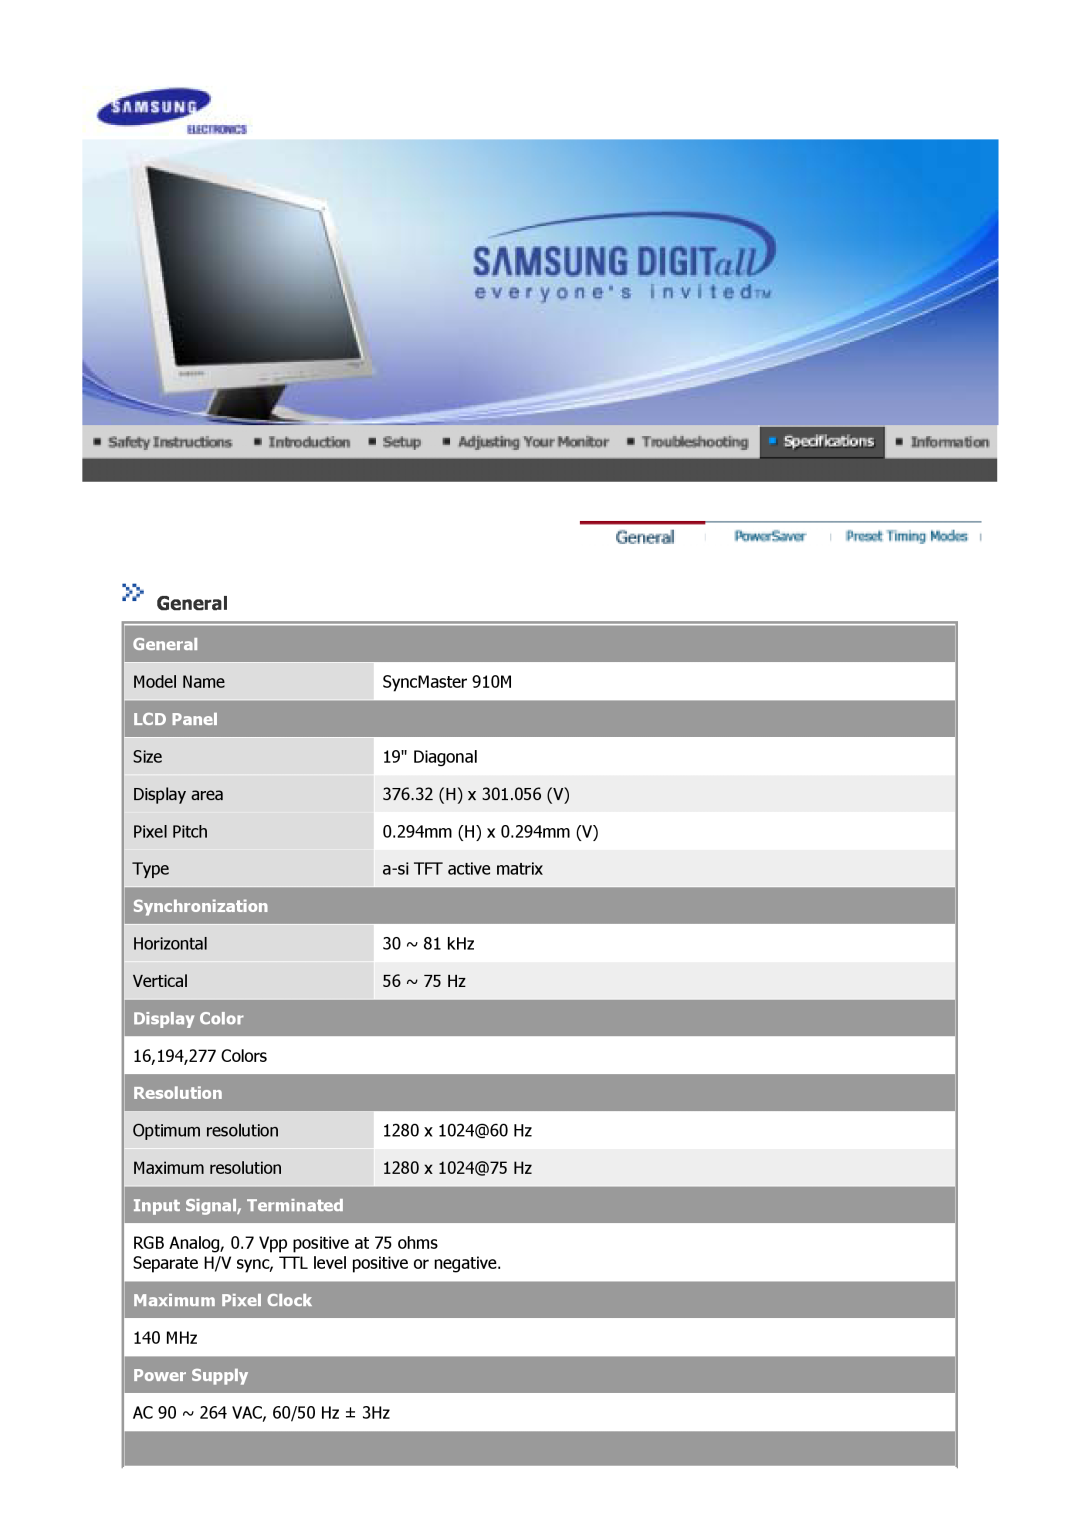 Samsung 510M General, LCD Panel, Synchronization, Display Color, Resolution, Input Signal, Terminated, Maximum Pixel Clock 